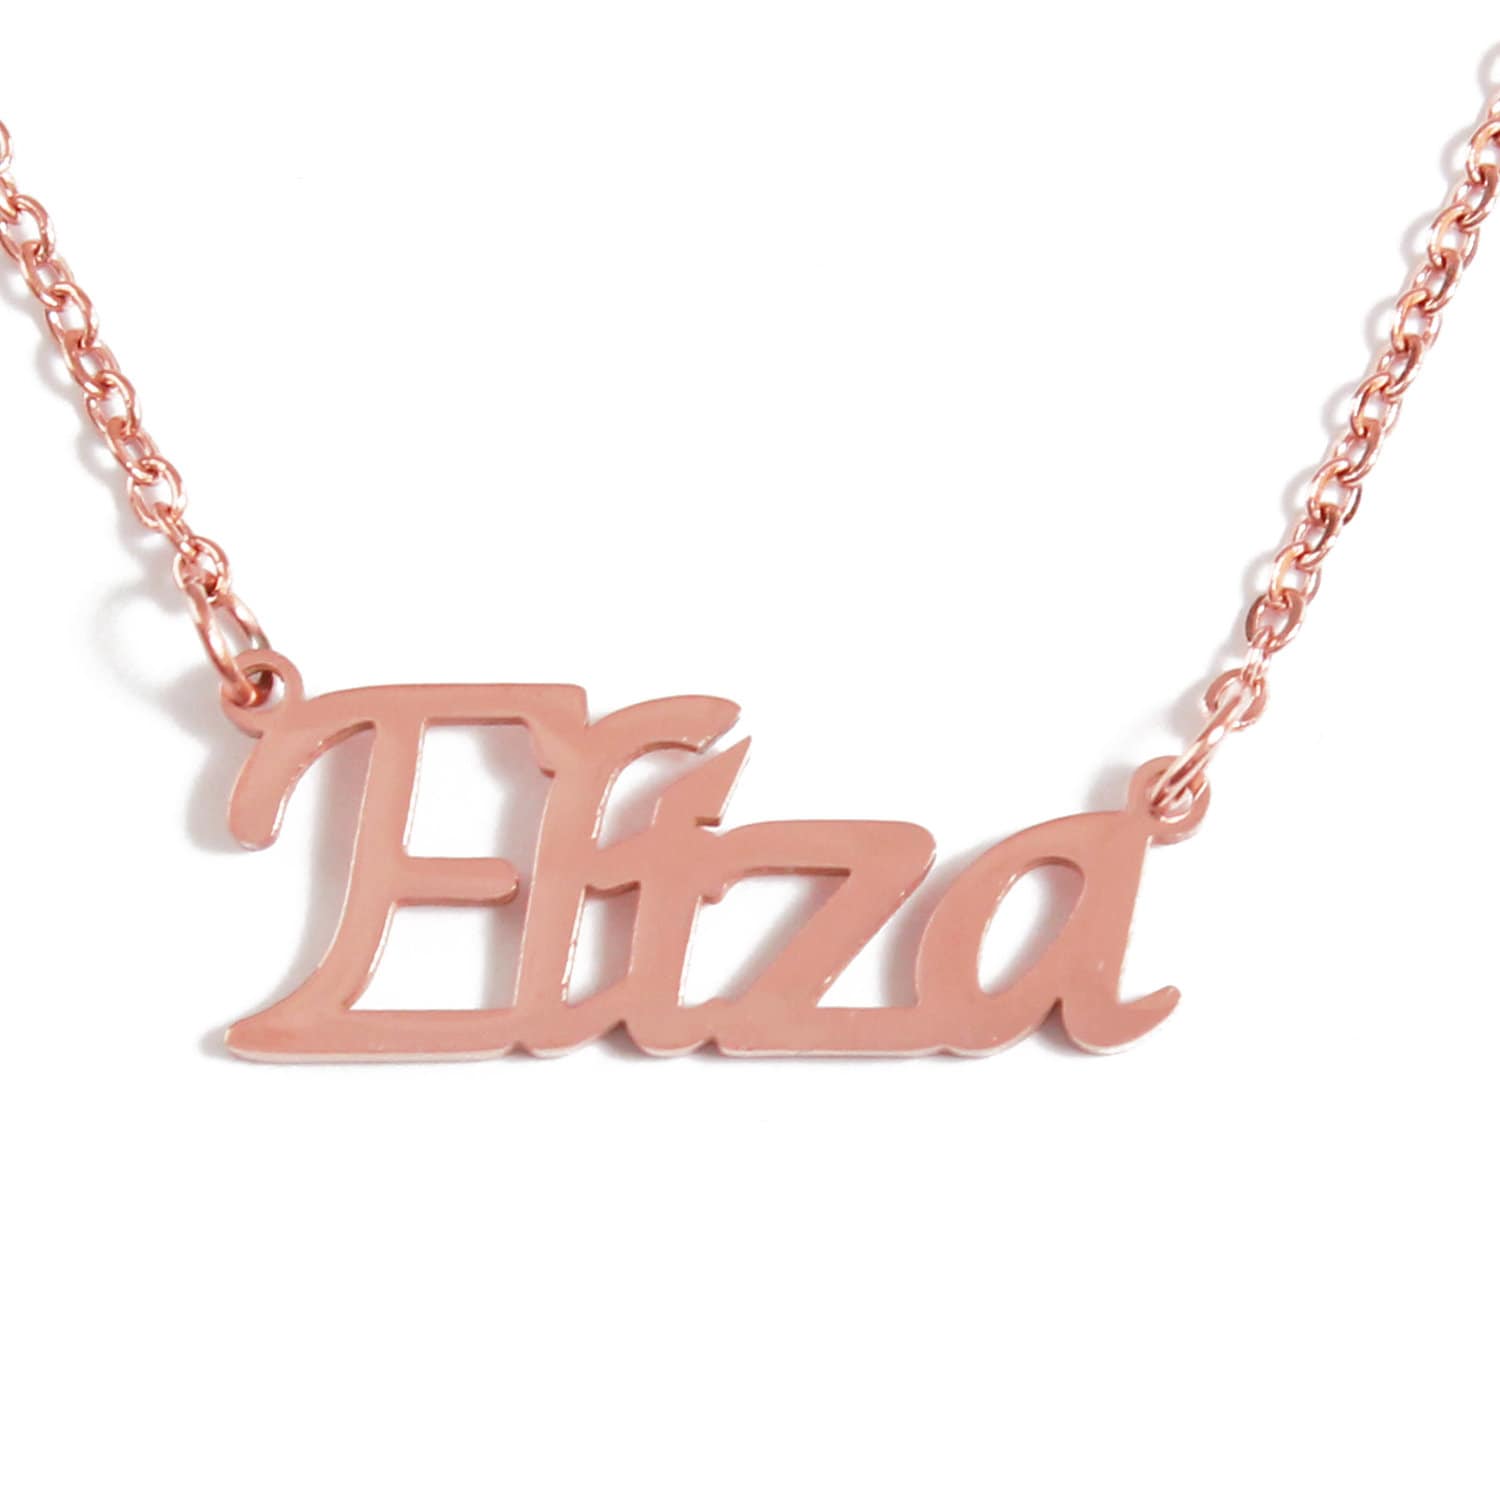 CLY Jewelry Elisa Name Necklace Personalized Rose Gold Snowflake Pendant Custom Customized Birthday Gift for Her 